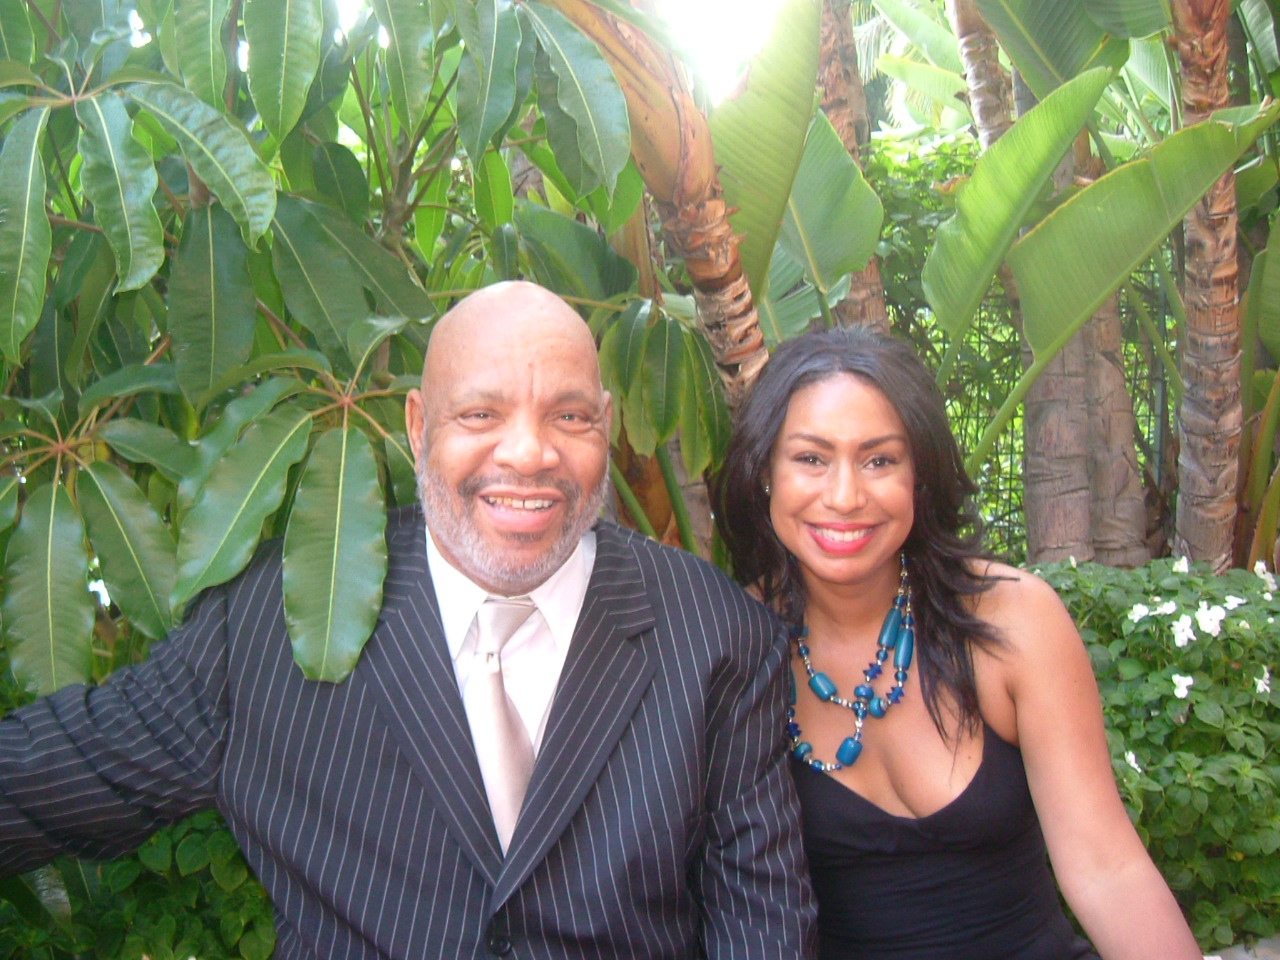 Wynne Wharff and James Avery at the Motown 20th Annual Heroes and Legends Scholarship Awards Gala, Sept, 27, 2009